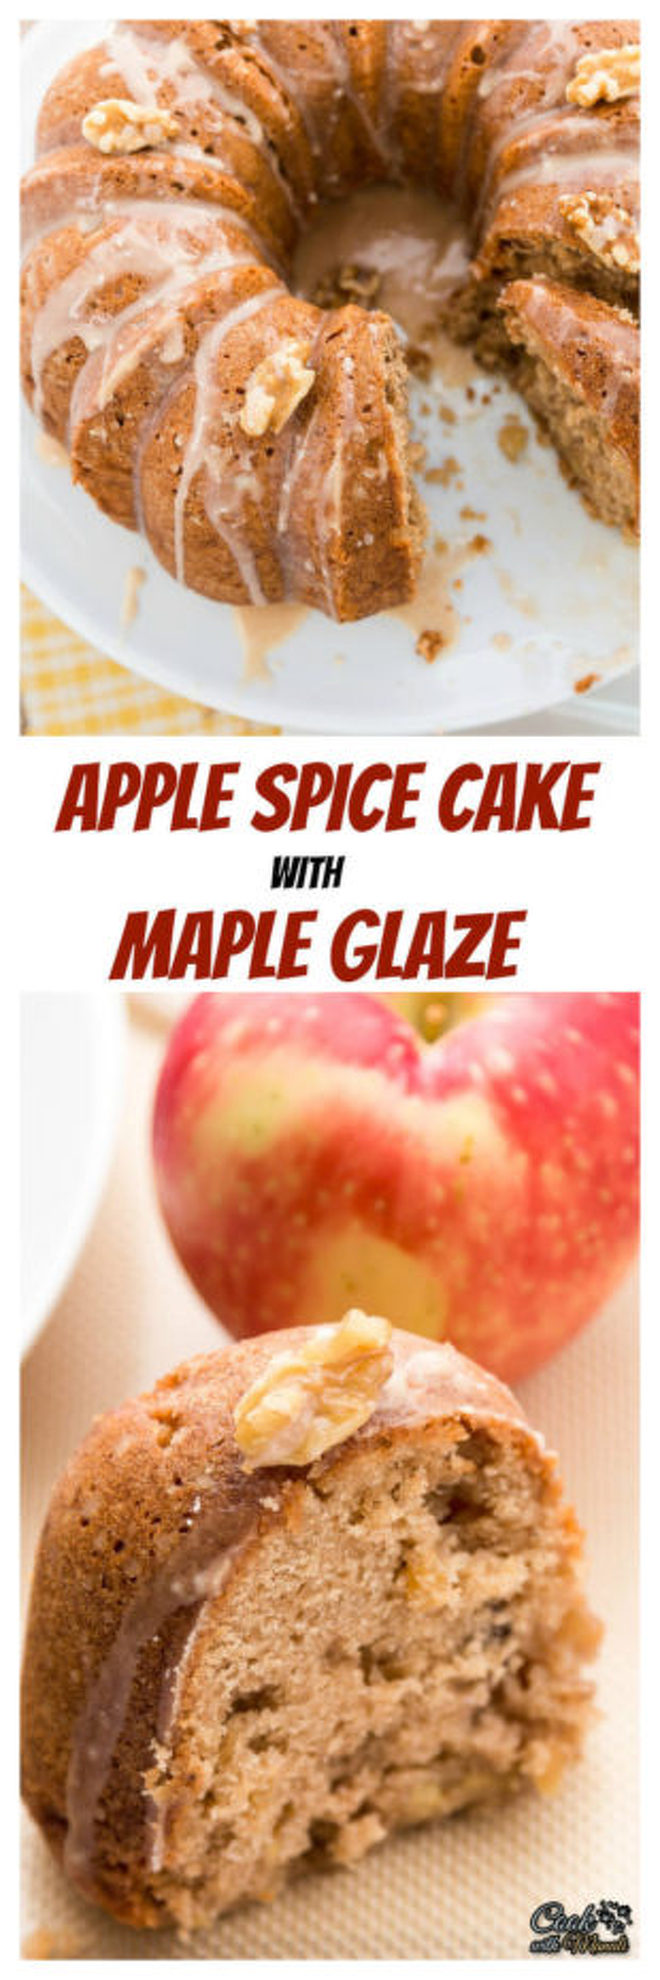 Apple Spice Cake with Maple Glaze - Cook With Manali